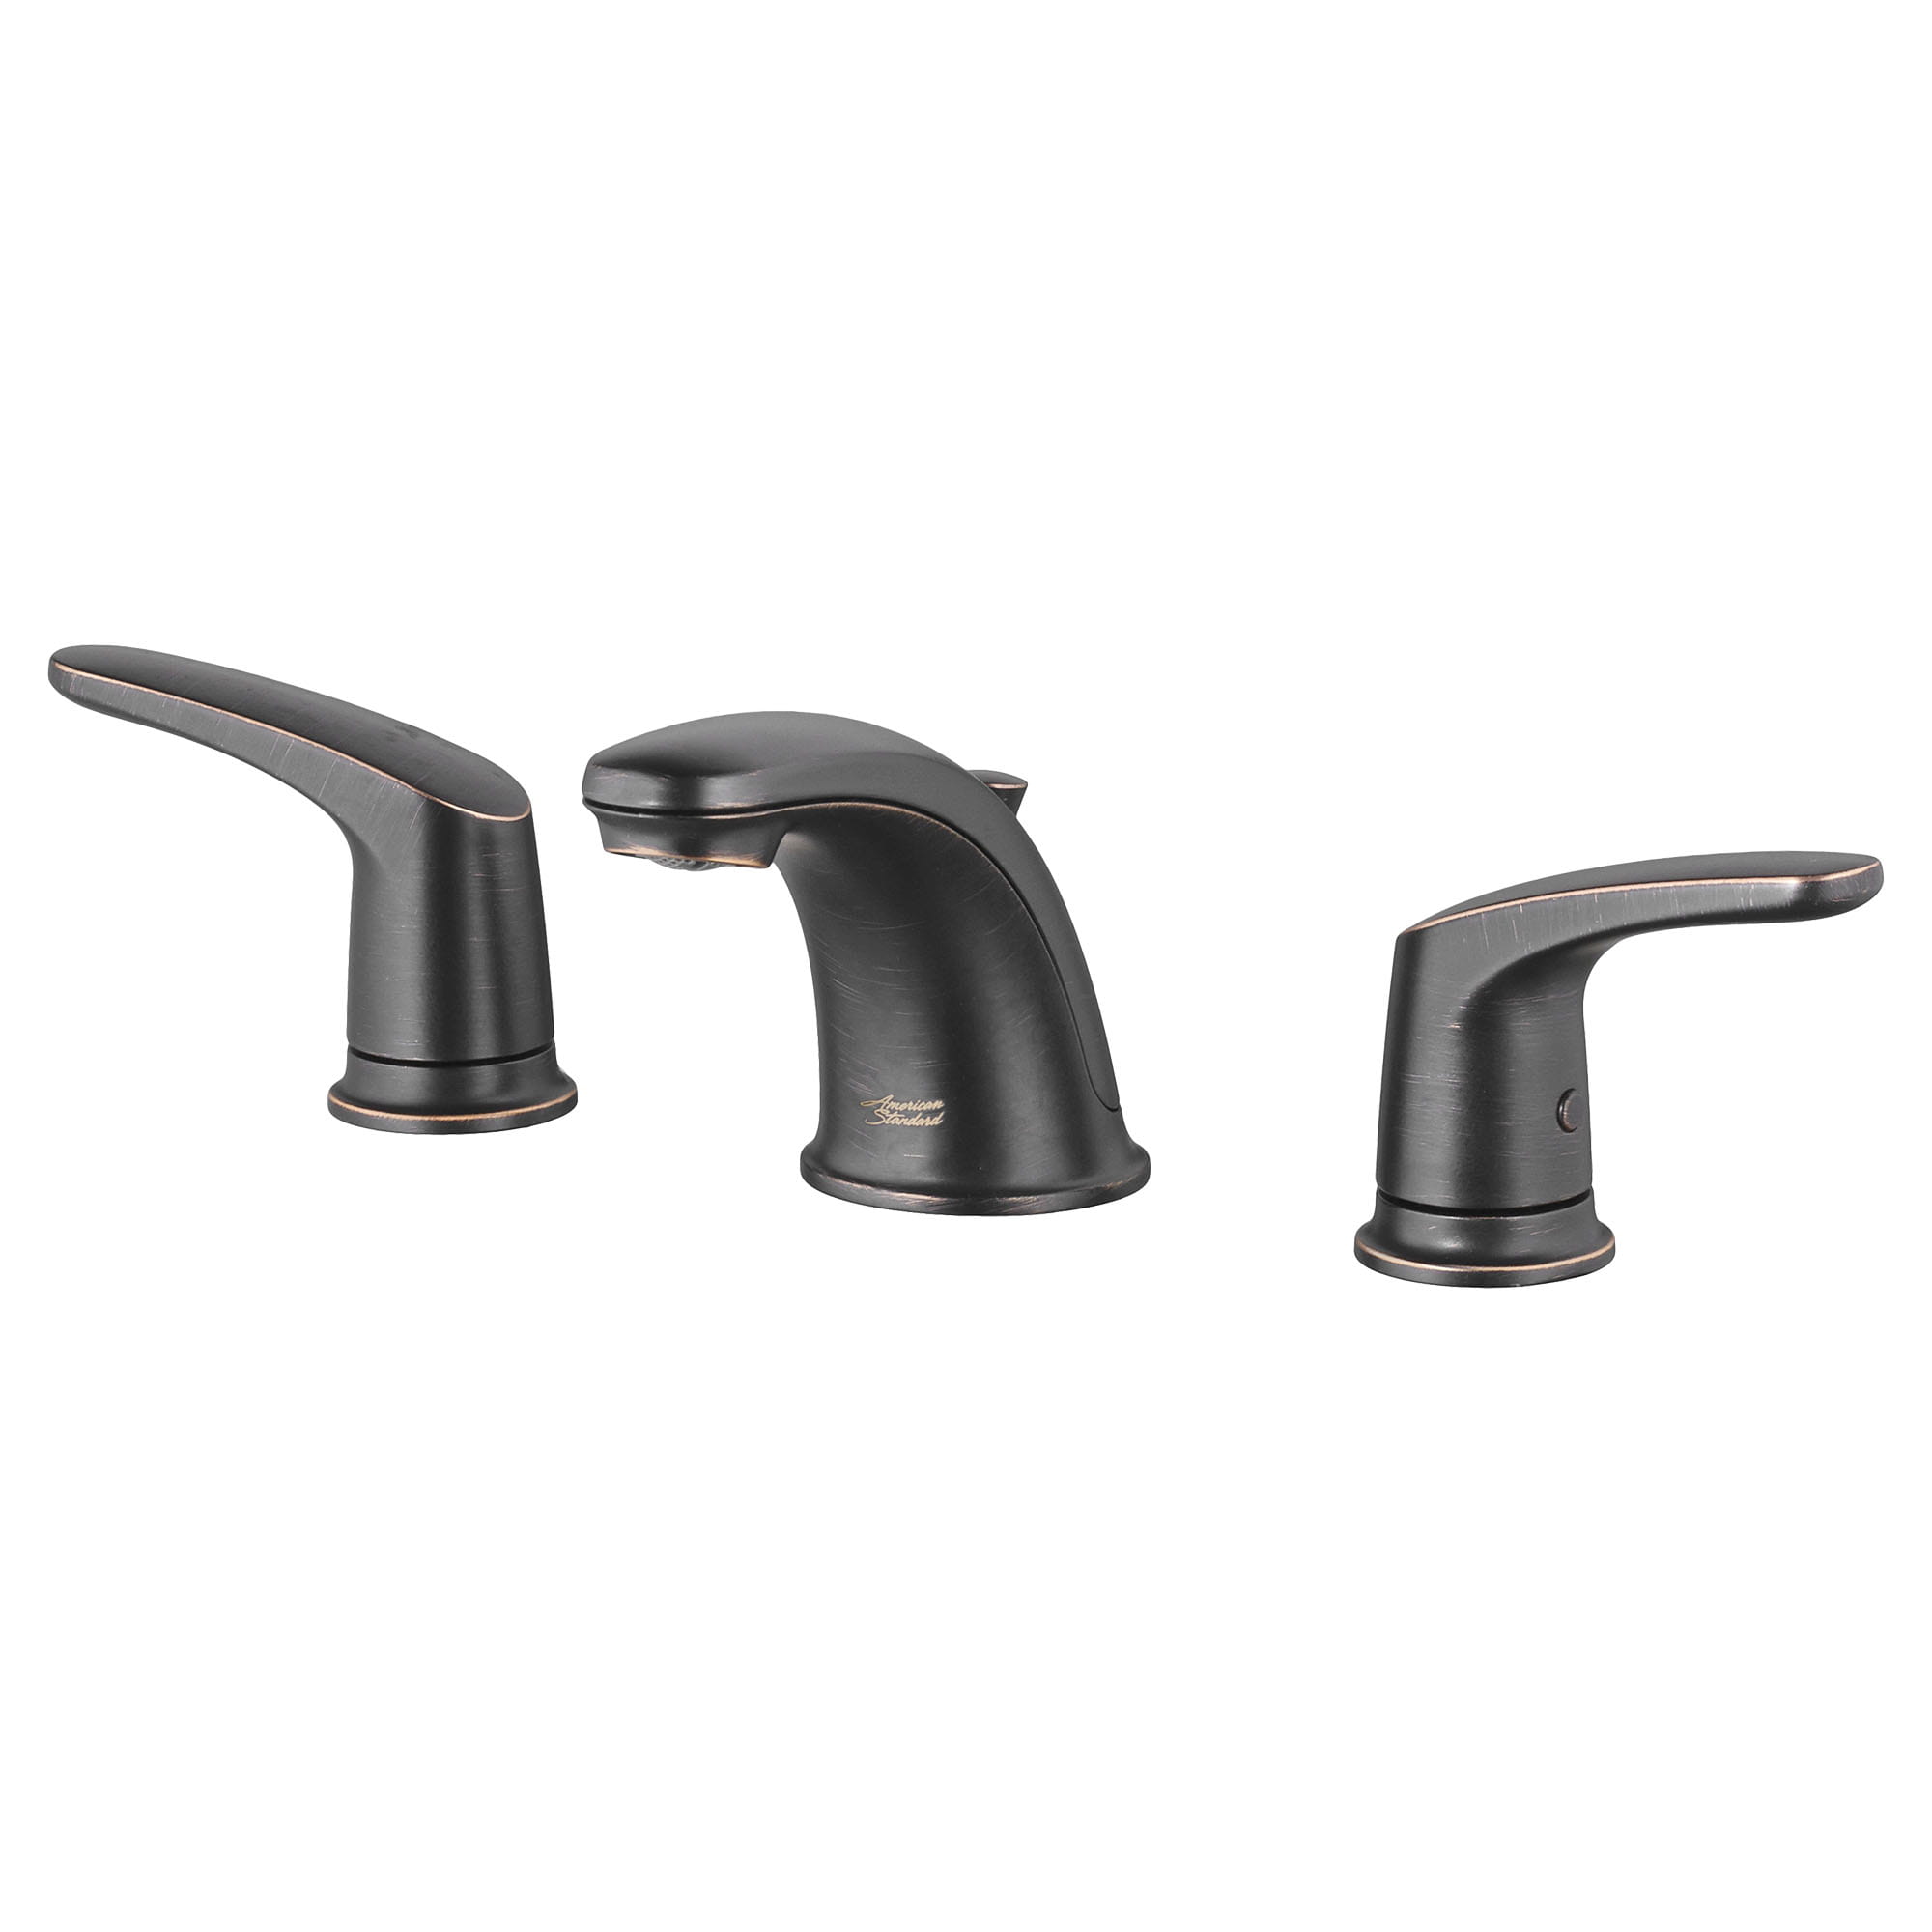 Colony PRO 8 Inch Widespread 2 Handle Bathroom Faucet 12 gpm 45 L min With Lever Handles LEGACY BRONZE